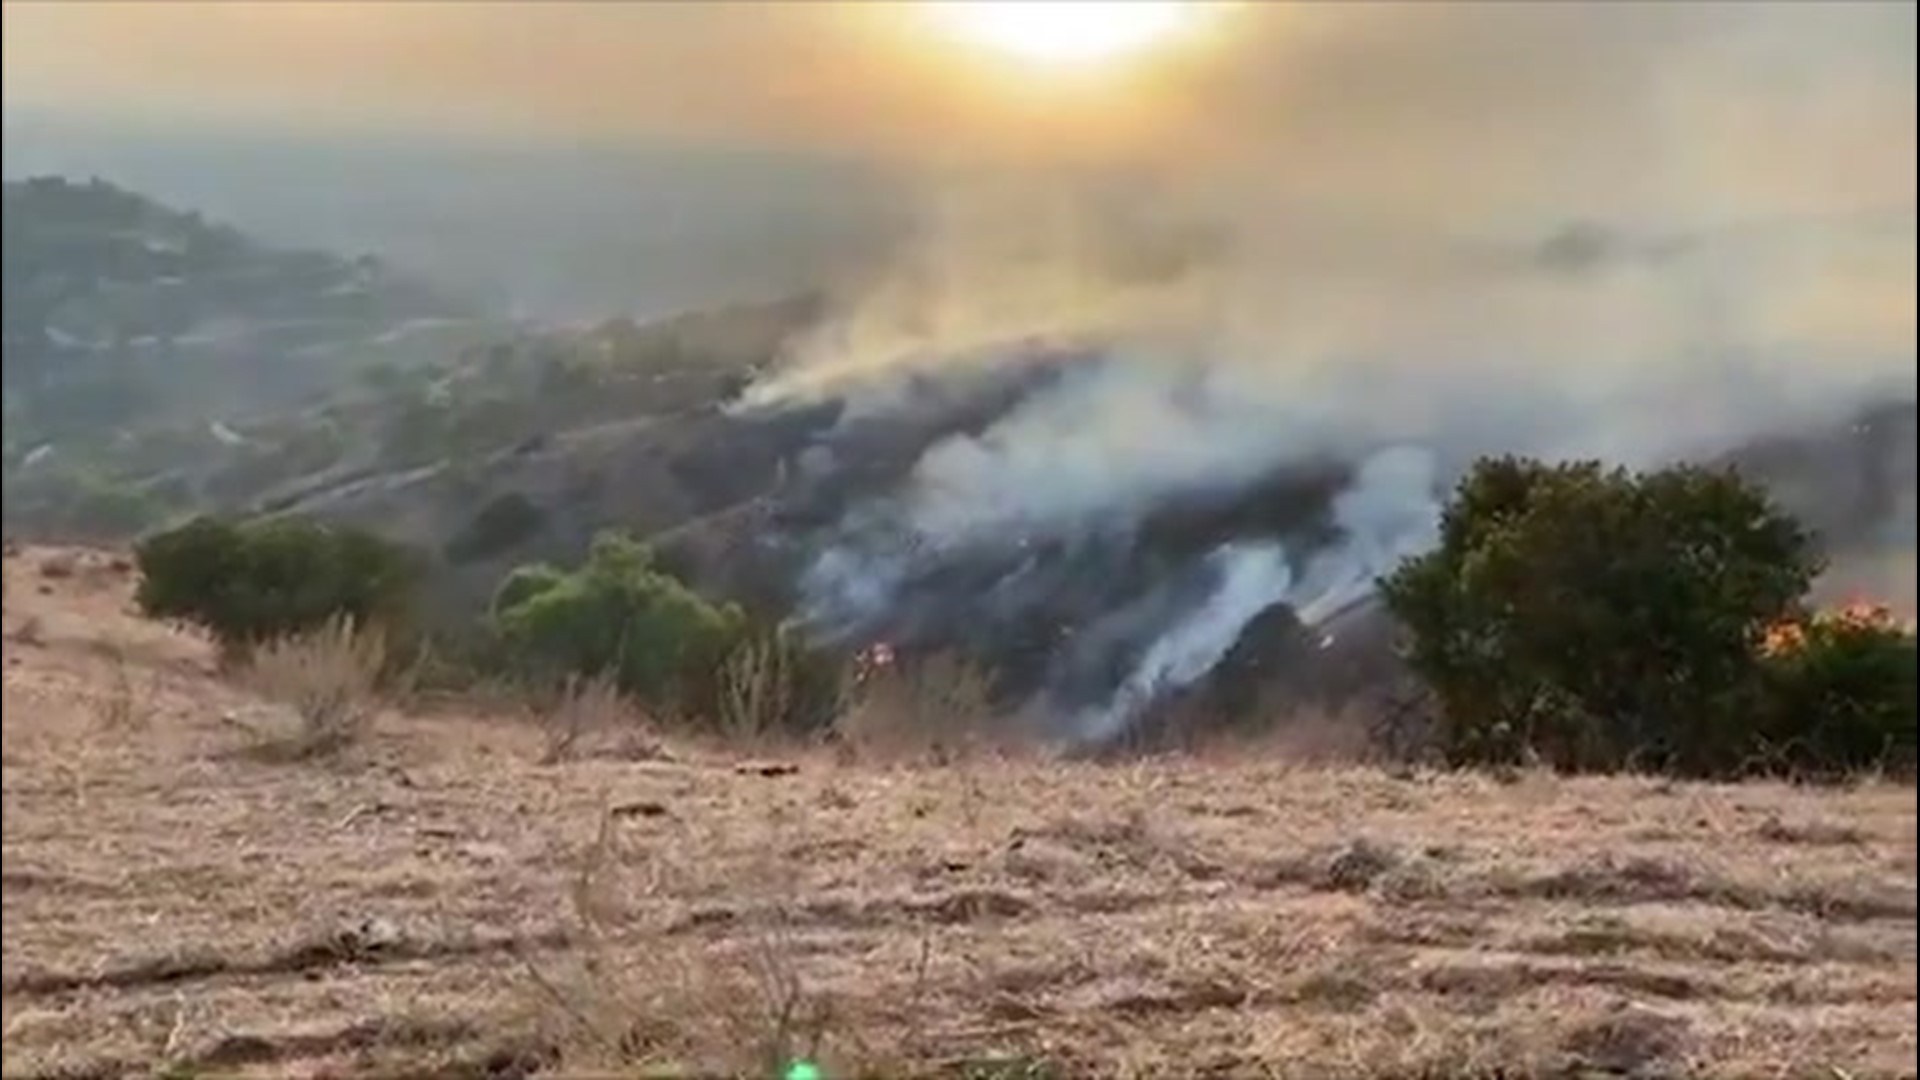 Firefighters contain brush fire in California's Brea Canyon | kens5.com